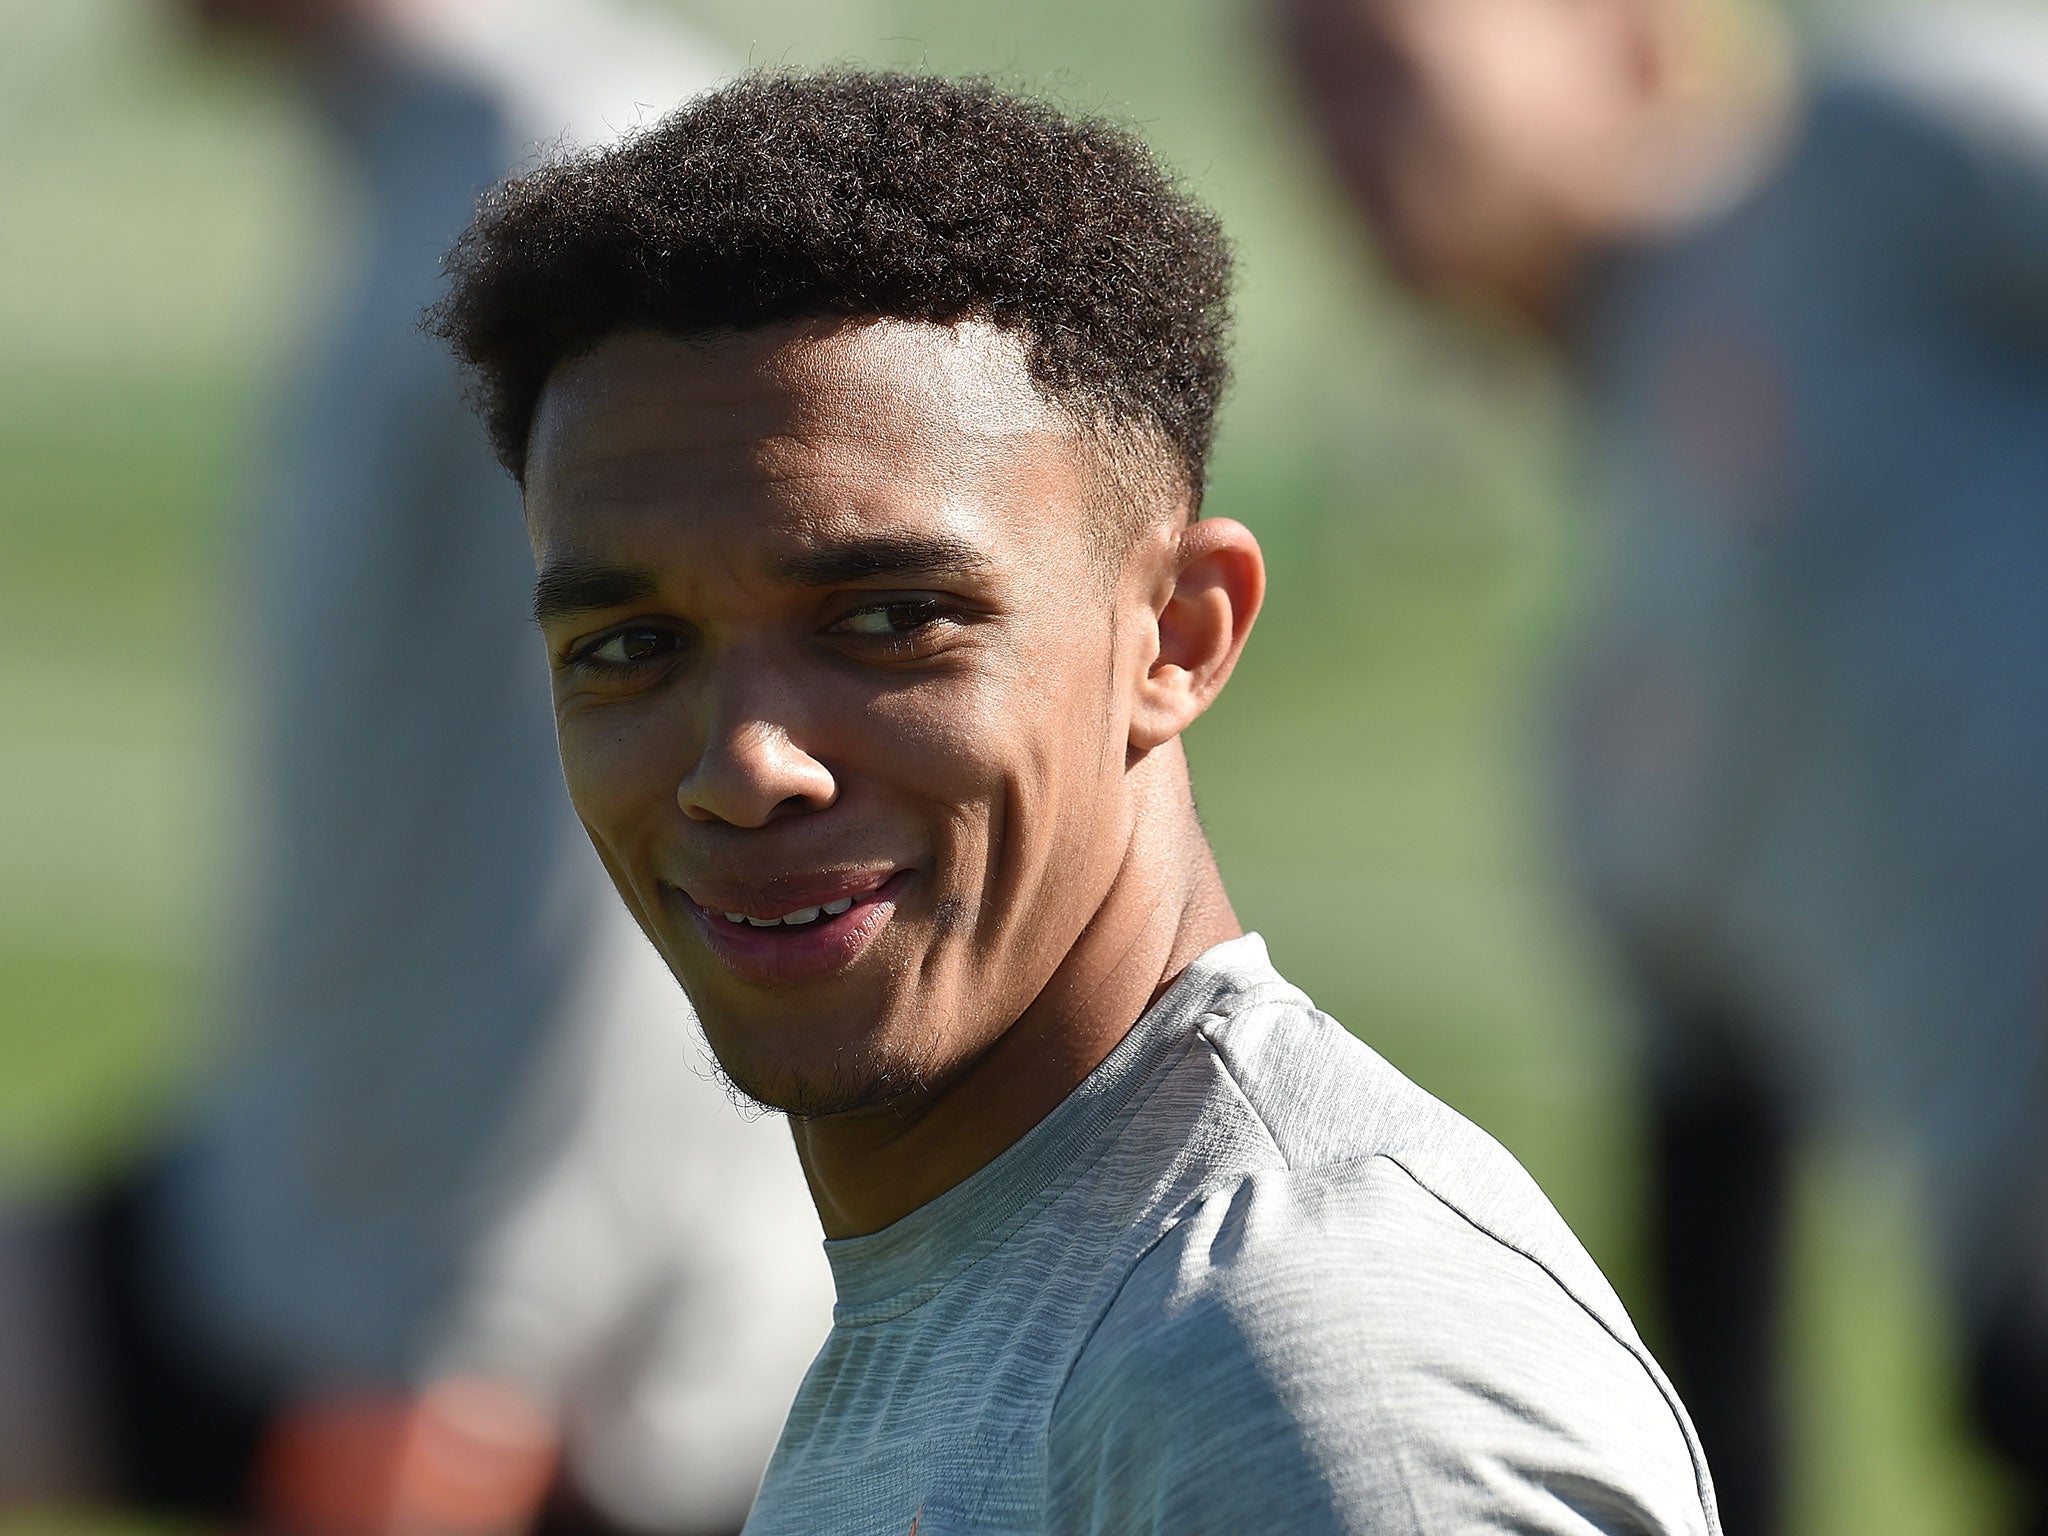 Trent Alexander-Arnold will travel with England to Russia this summer